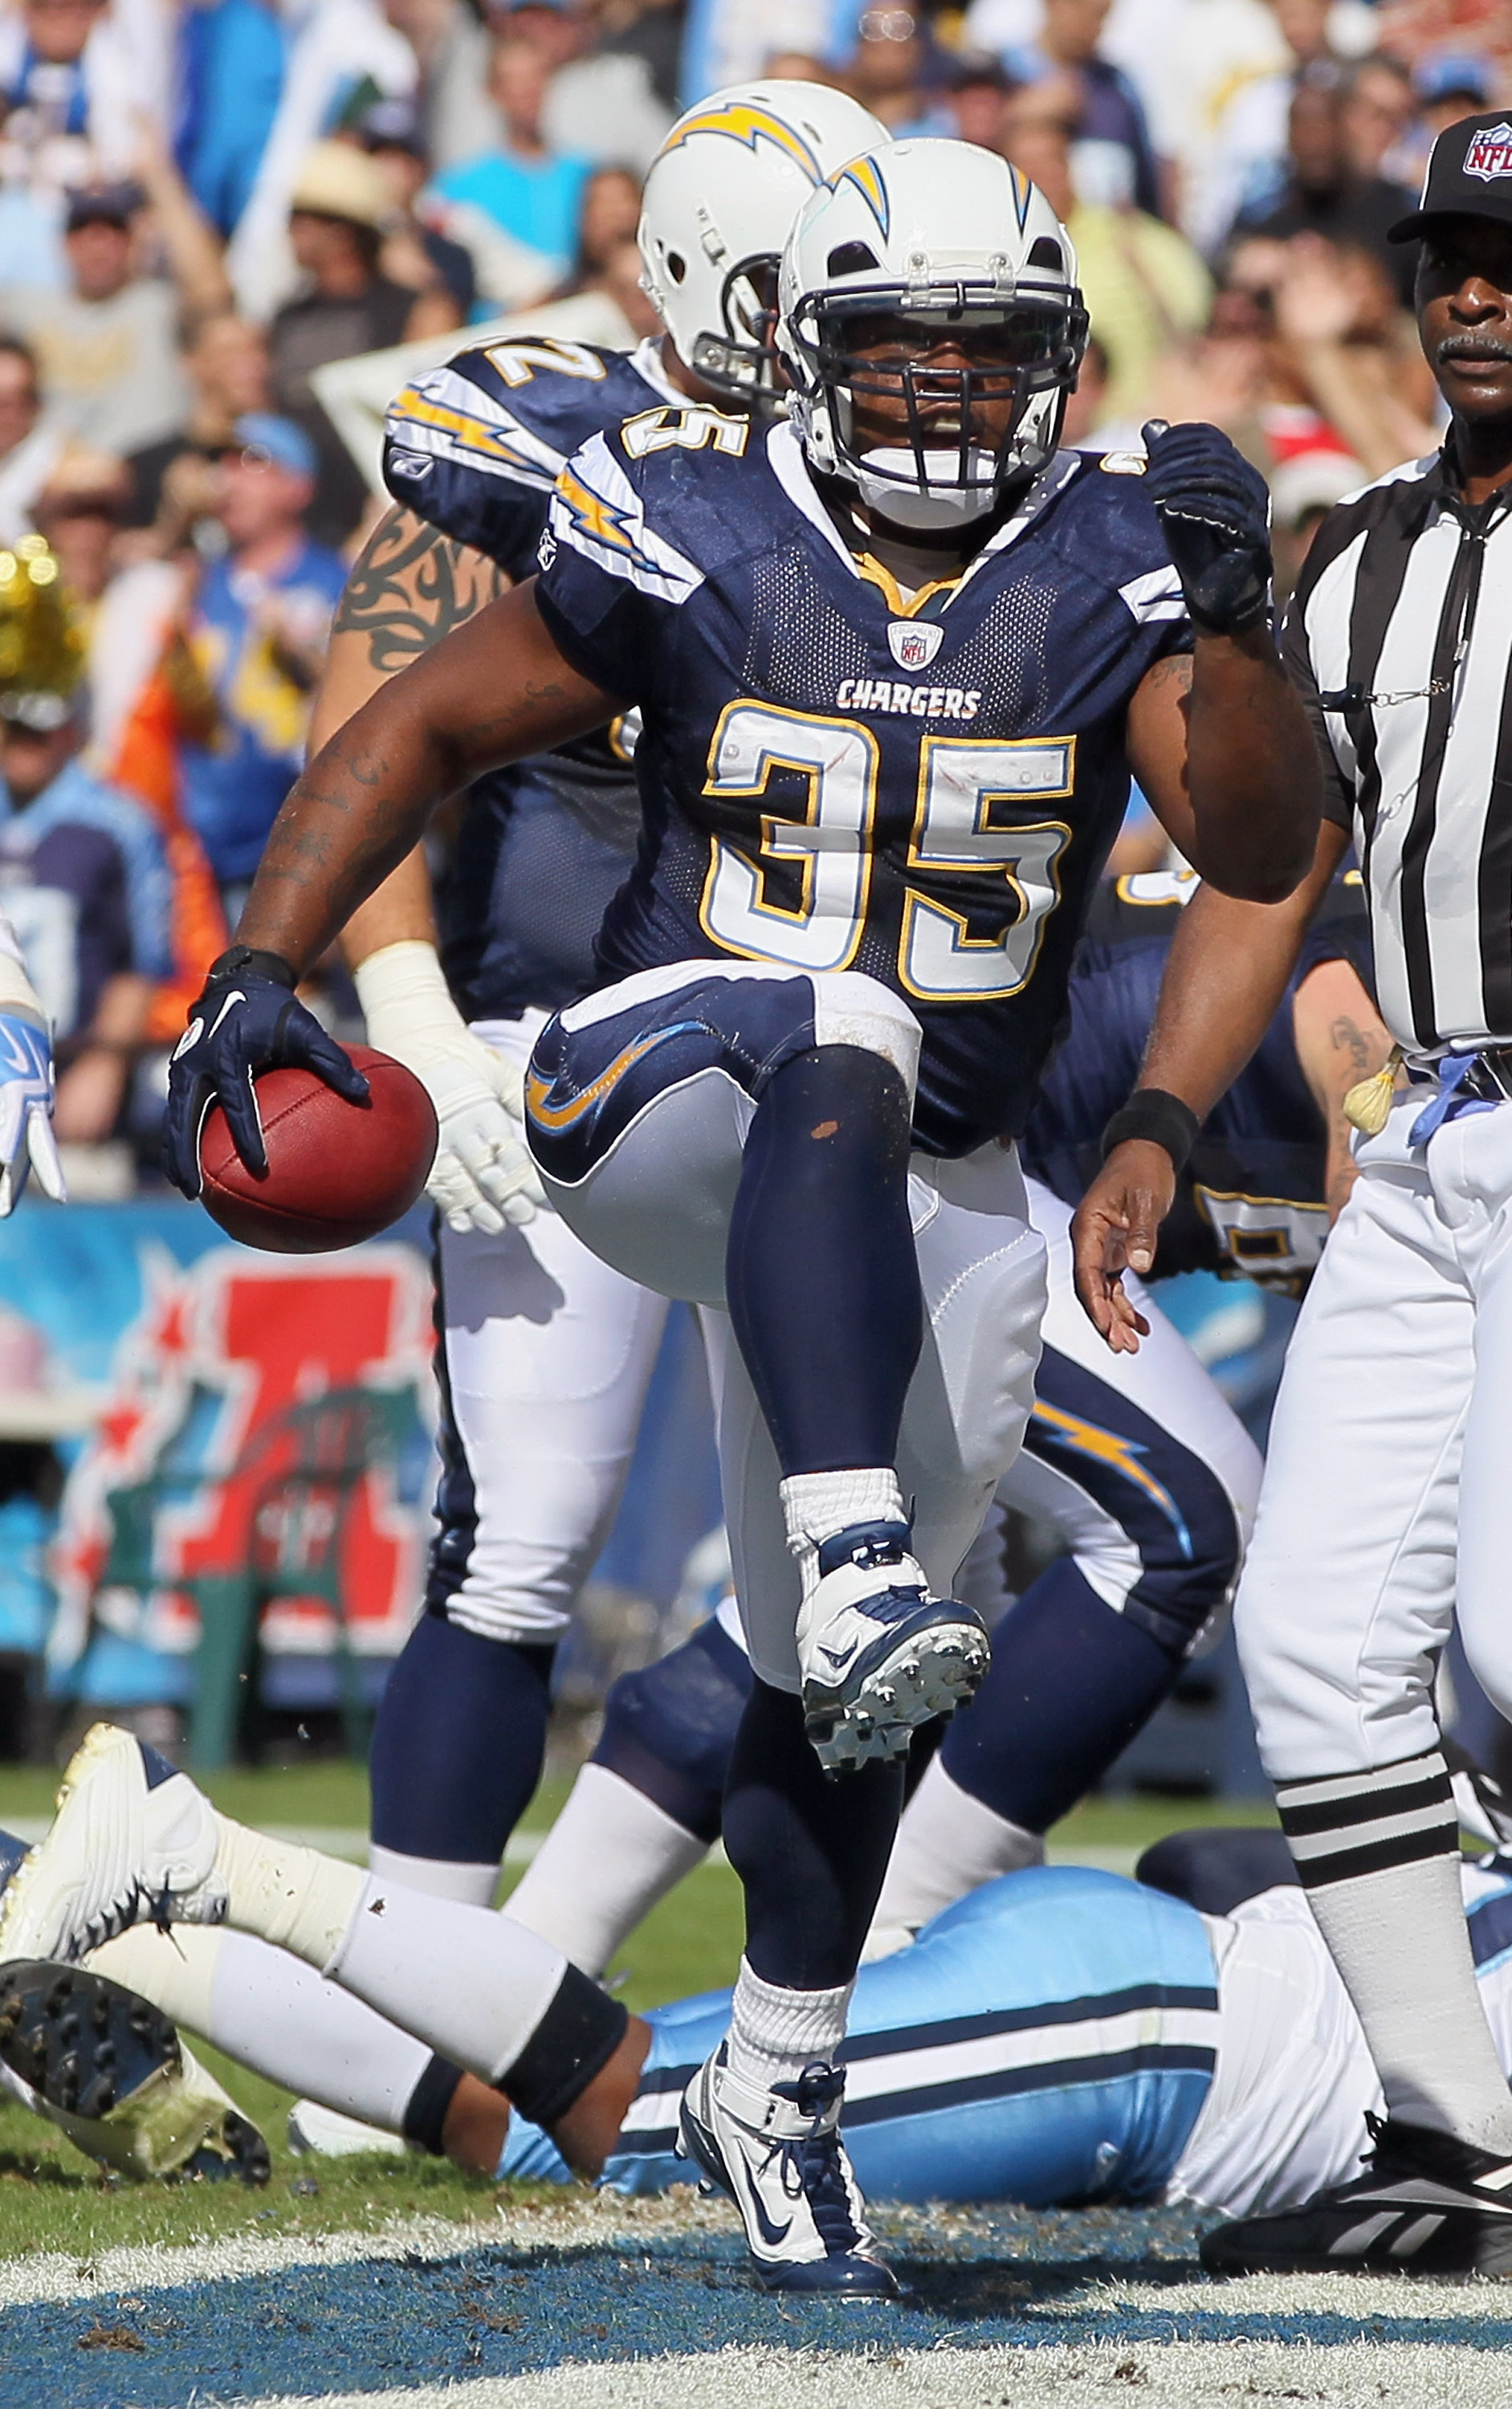 SAN DIEGO - OCTOBER 31:  Running back Mike Tolbert #35 of the San Diego Chargers celebrates a touchdown against the Tennessee Titans in the first quarter at Qualcomm Stadium on October 31, 2010 in San Diego, California. The Chargers defeated the Titans 33